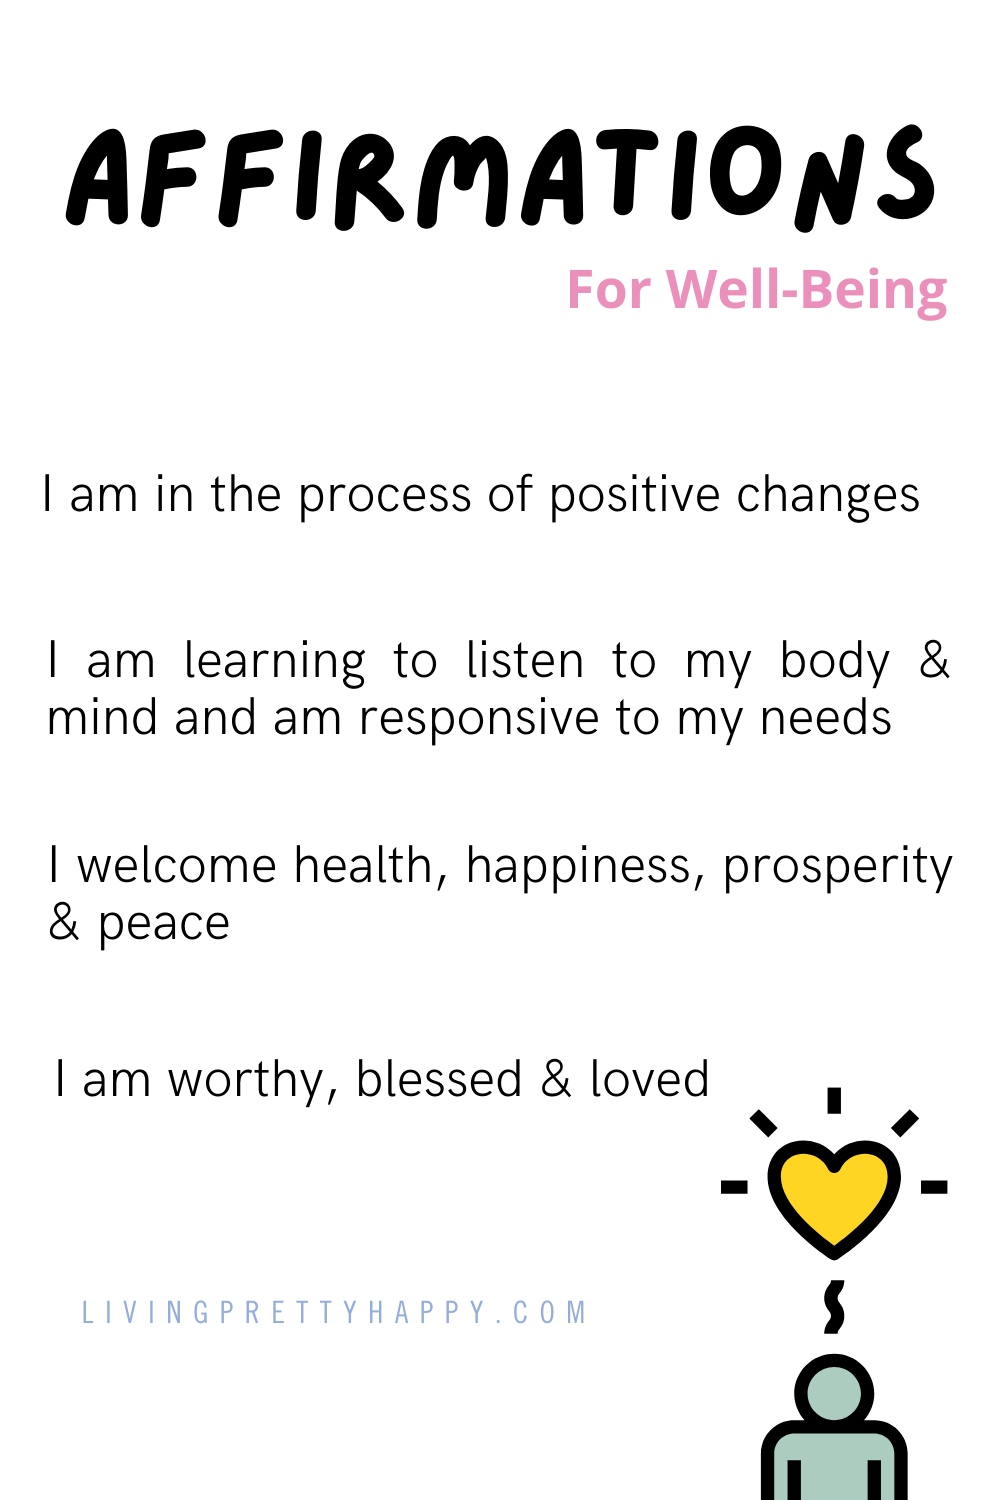 Positive Affirmations for better well-being and wellness. Use these manisfestation affirmations for a happier day